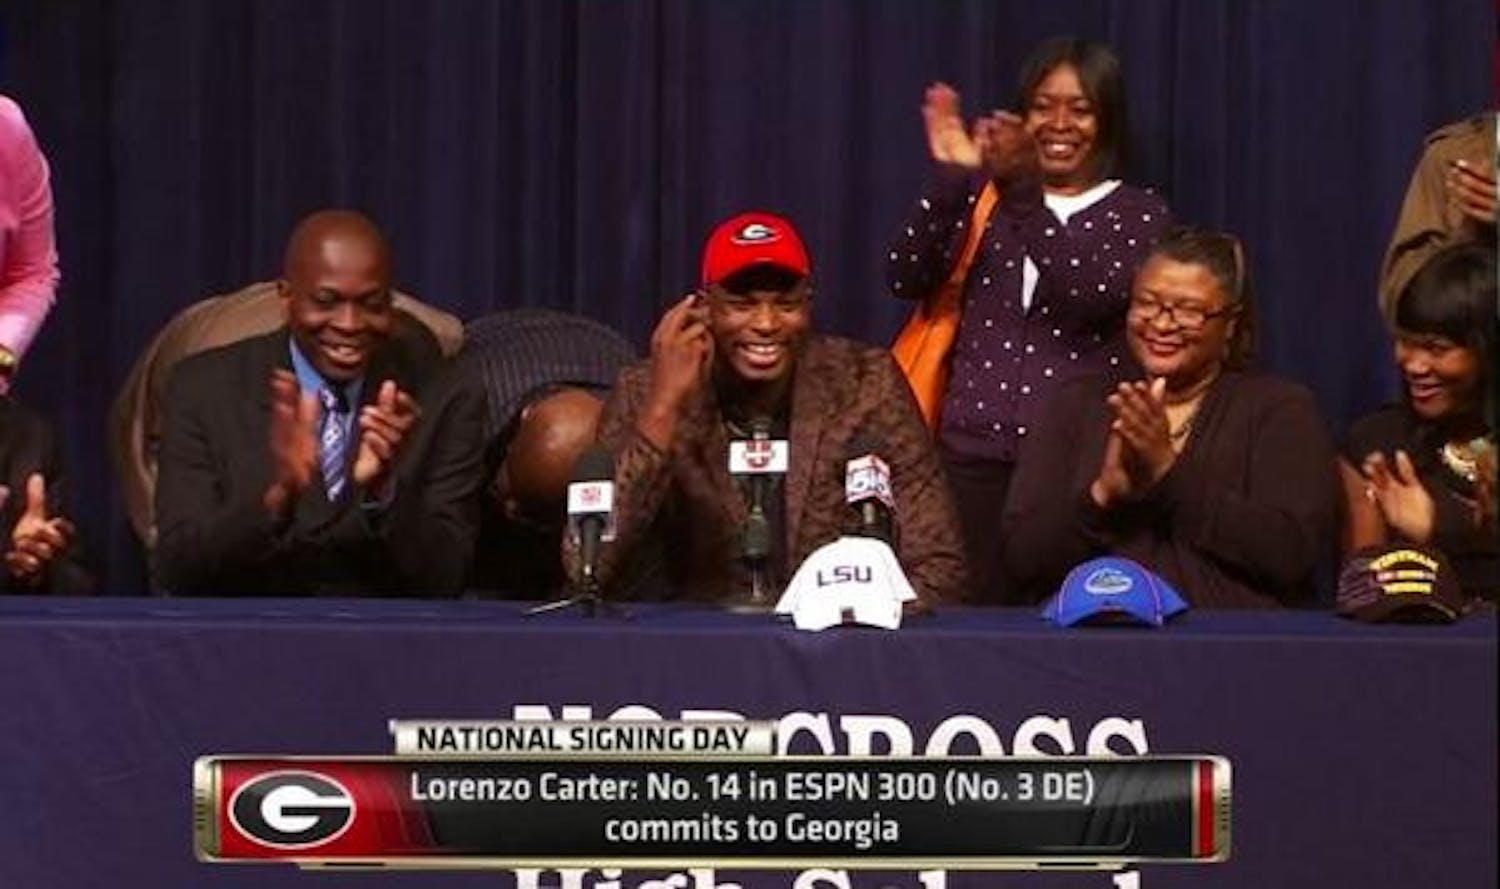 Four-star defensive end Lorenzo Carter selects Georgia over Florida and LSU during a ceremony at his high school, Norcross (Ga.) High, on Wednesday afternoon.